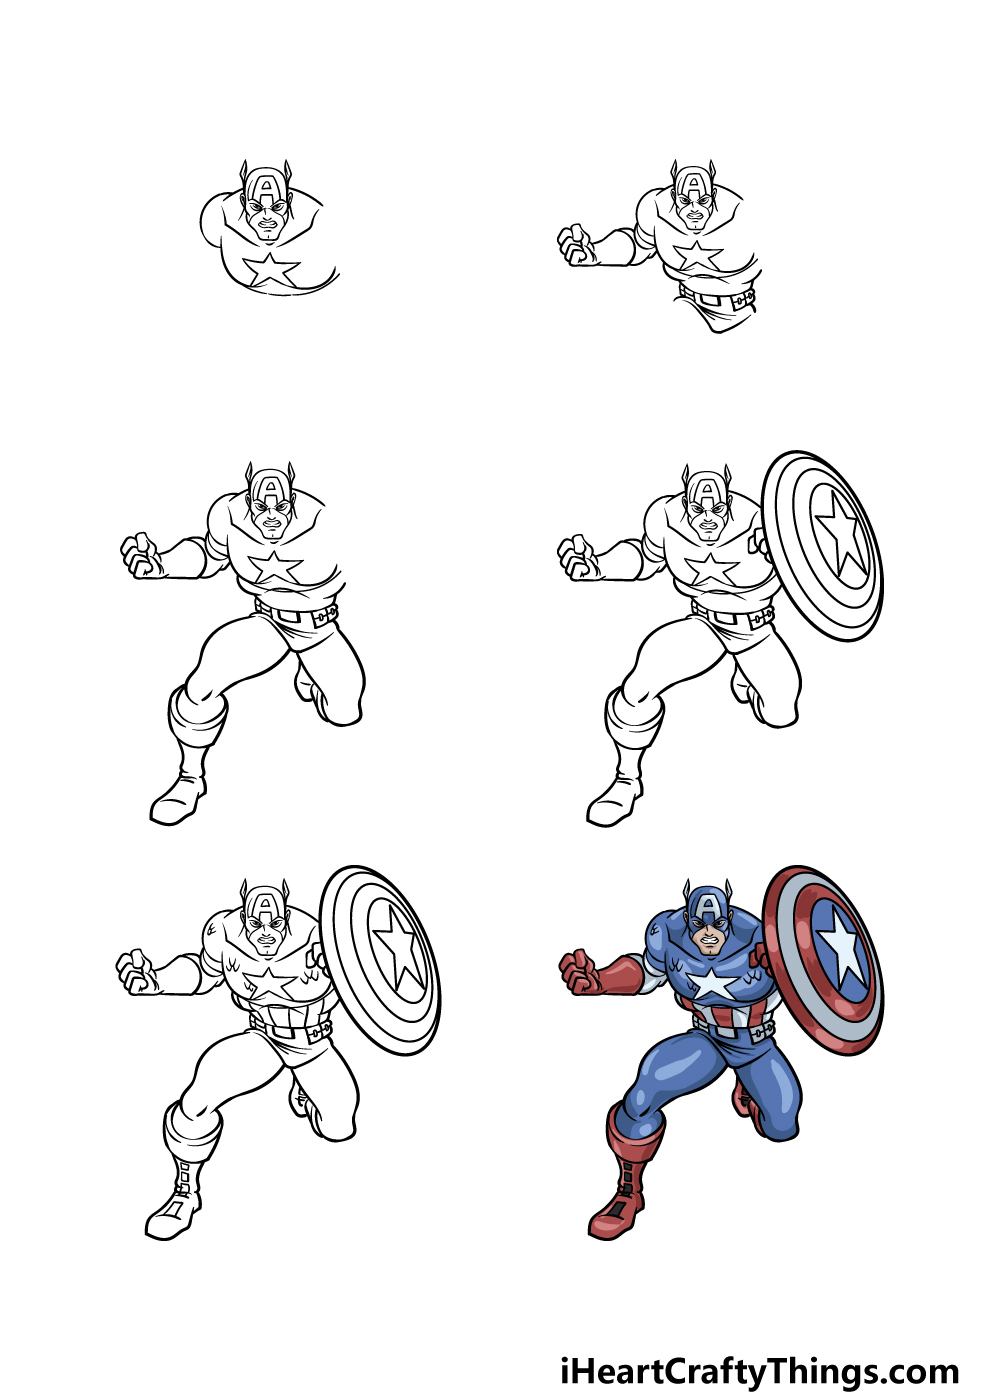 Realistic Sketch Of Captain America Drawing - Drawing Skill-saigonsouth.com.vn